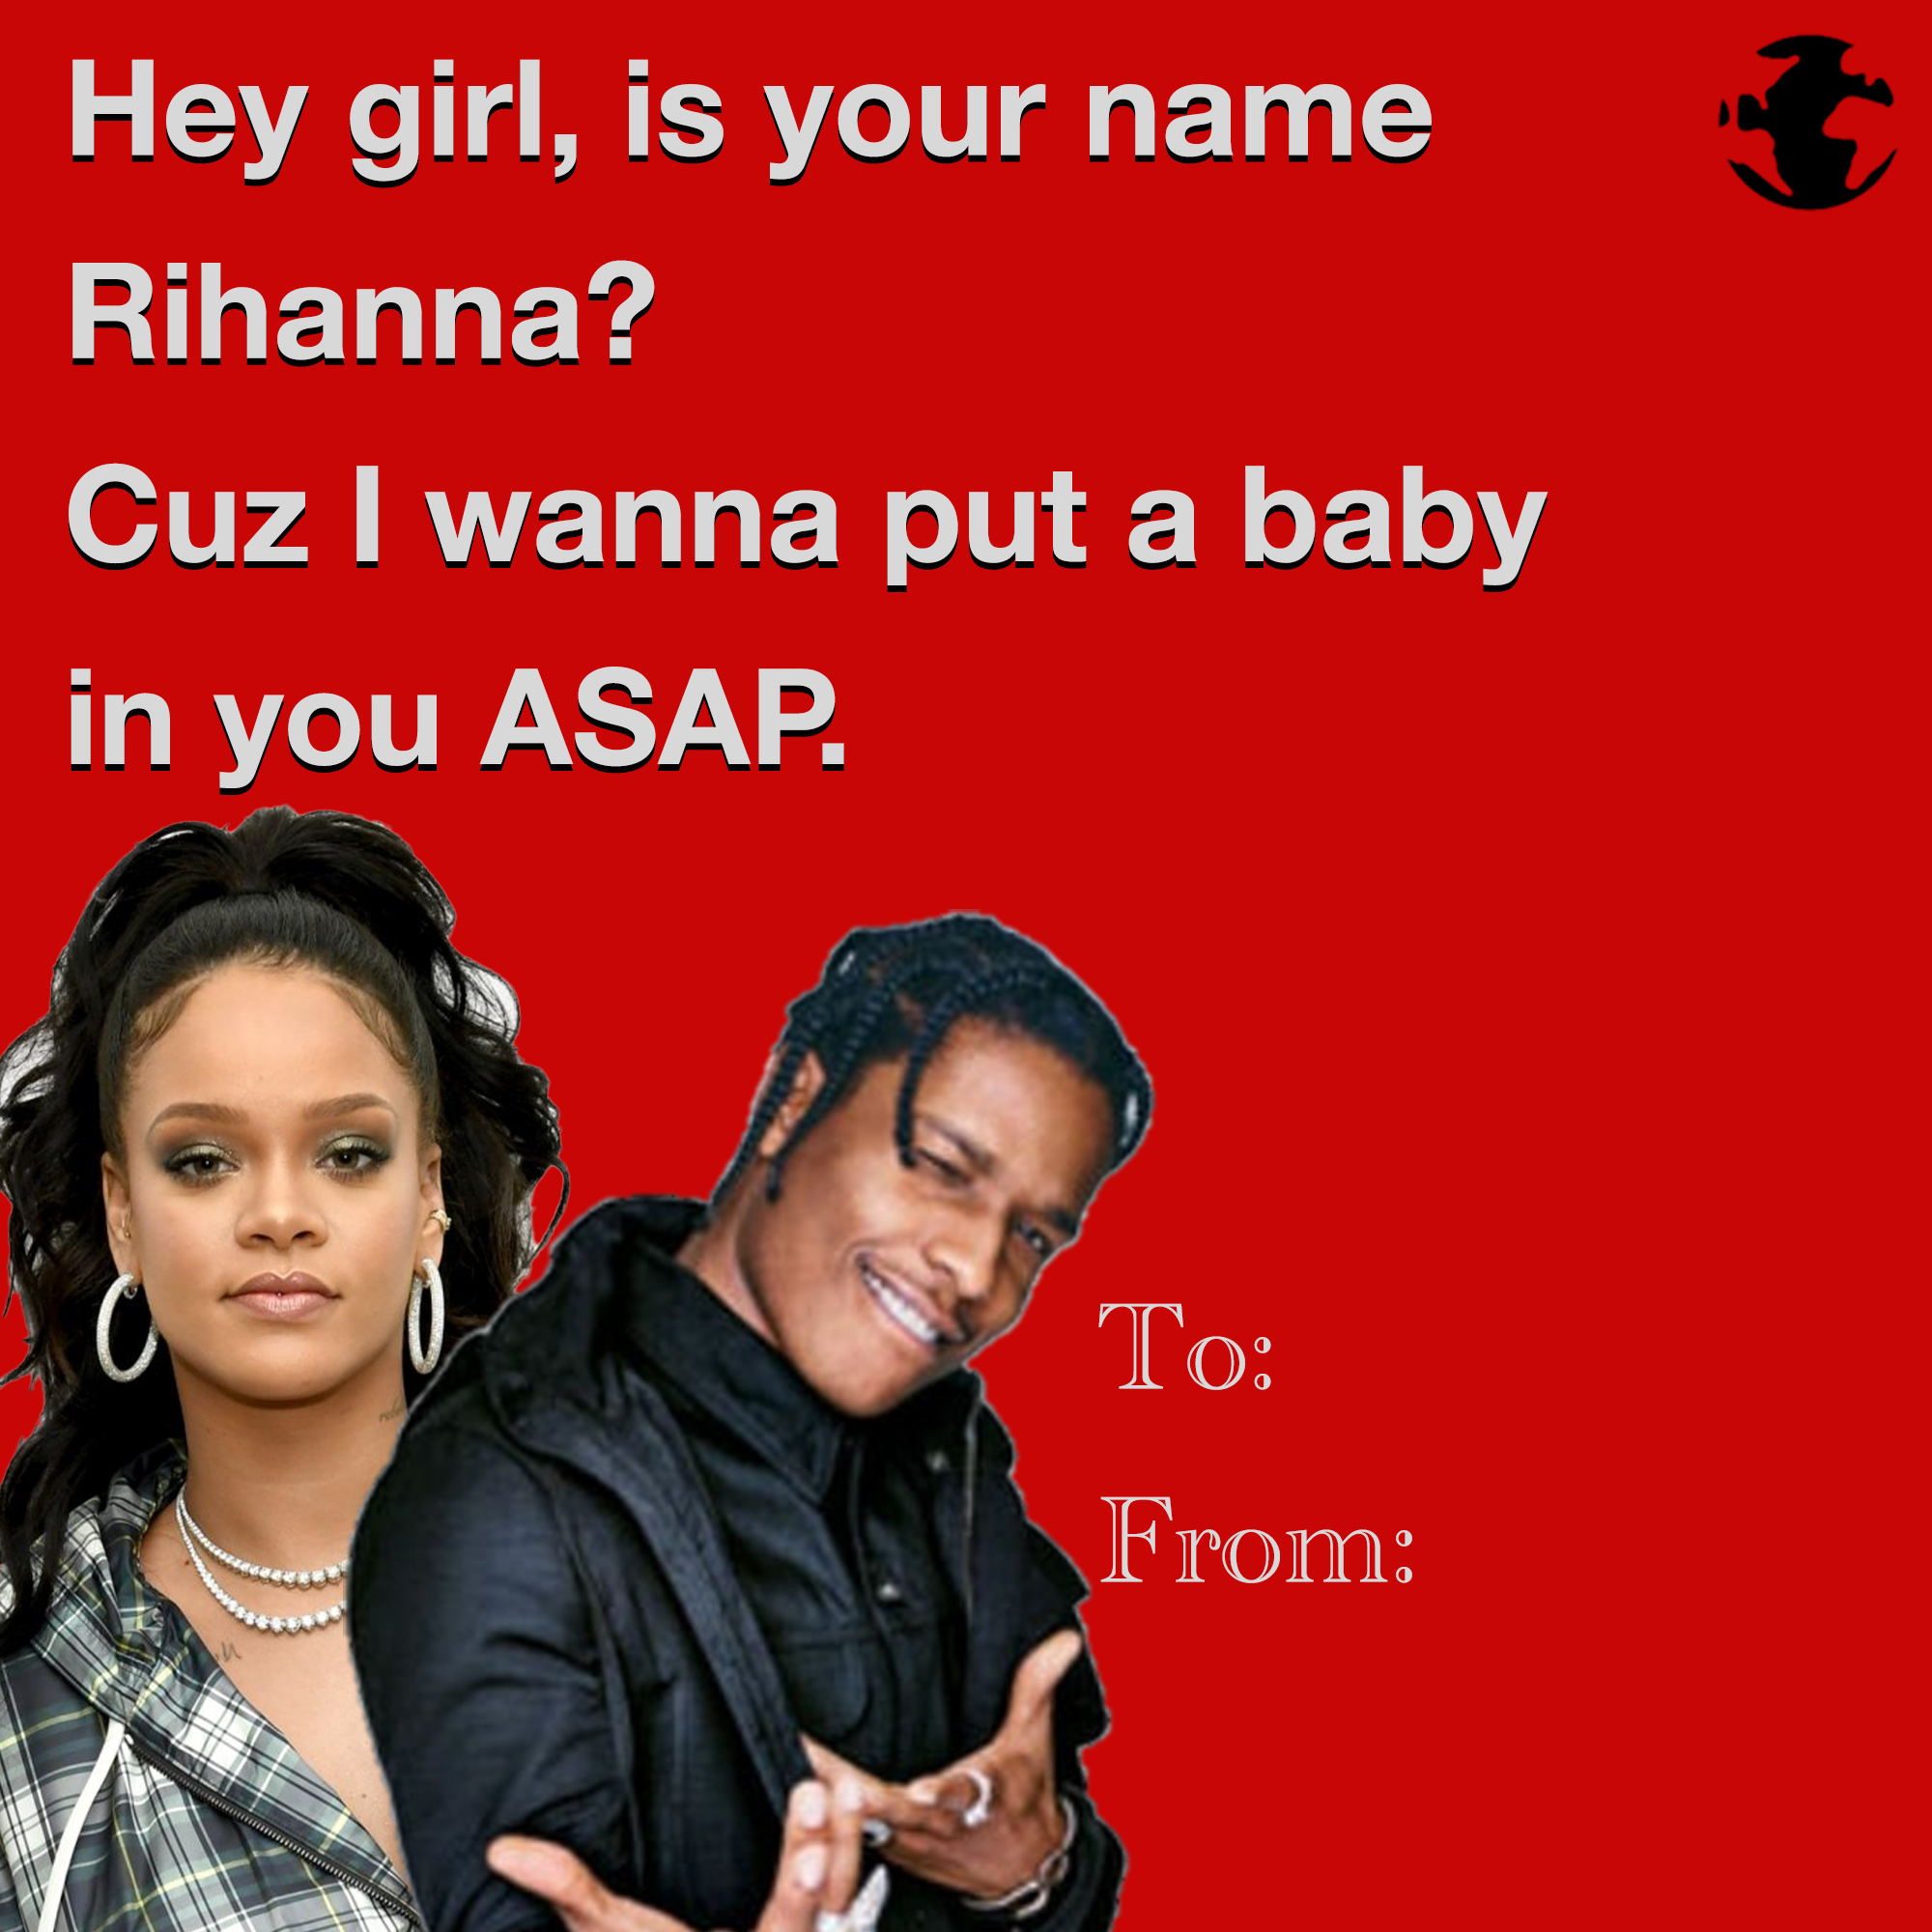 eBaum's Valentine's Day Cards 2022 - national archaeological museum - Hey girl, is your name Rihanna? Cuz I wanna put a baby in you Asap. To From